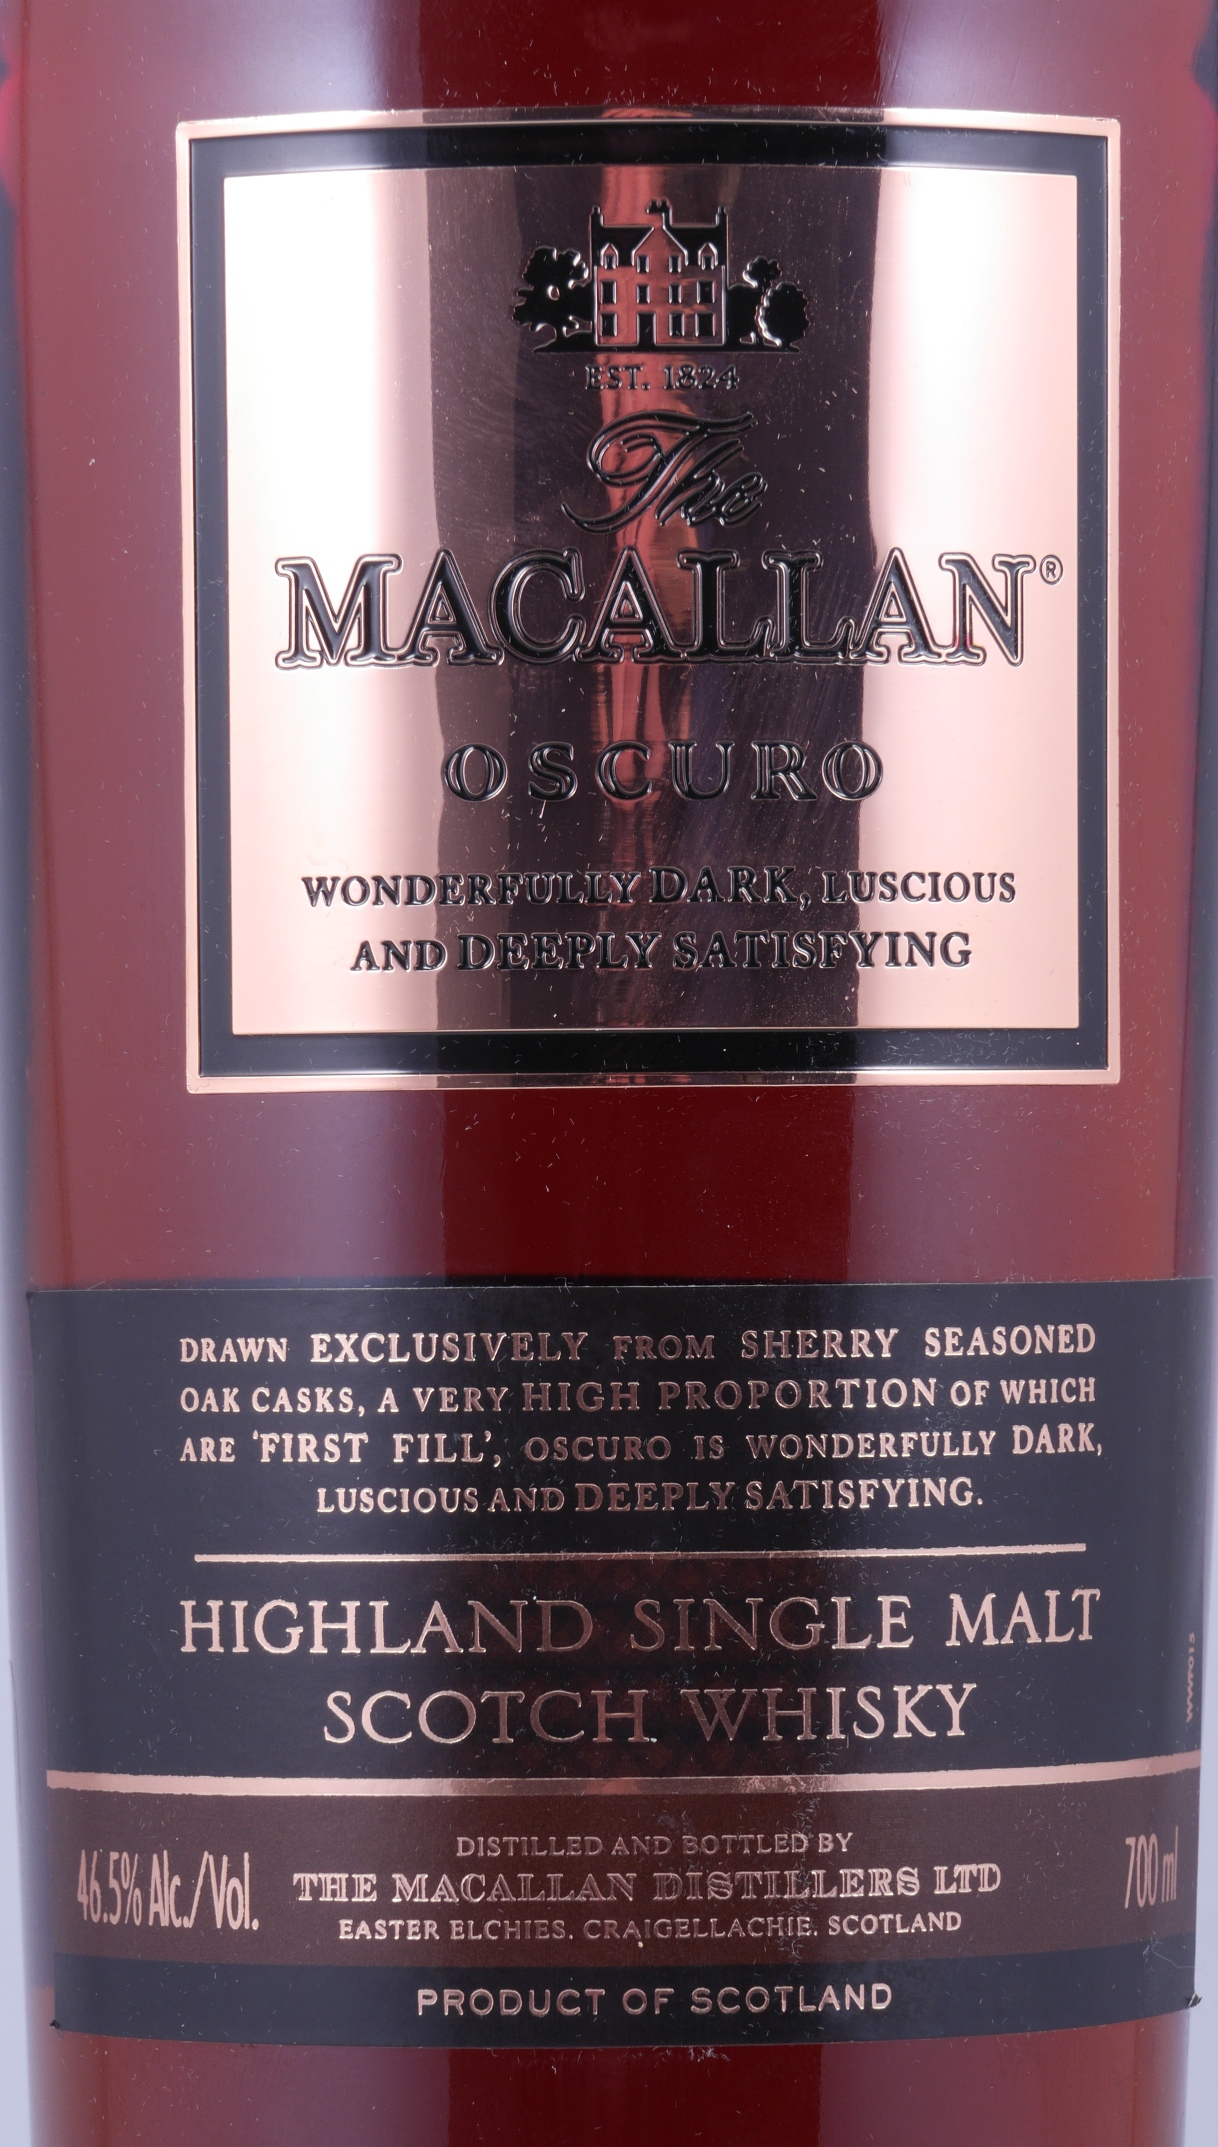 Buy The Macallan Oscuro Release 2010 The 1824 Collection Highland Single Malt Scotch Whisky 46 5 Abv At Amcom Secure Online